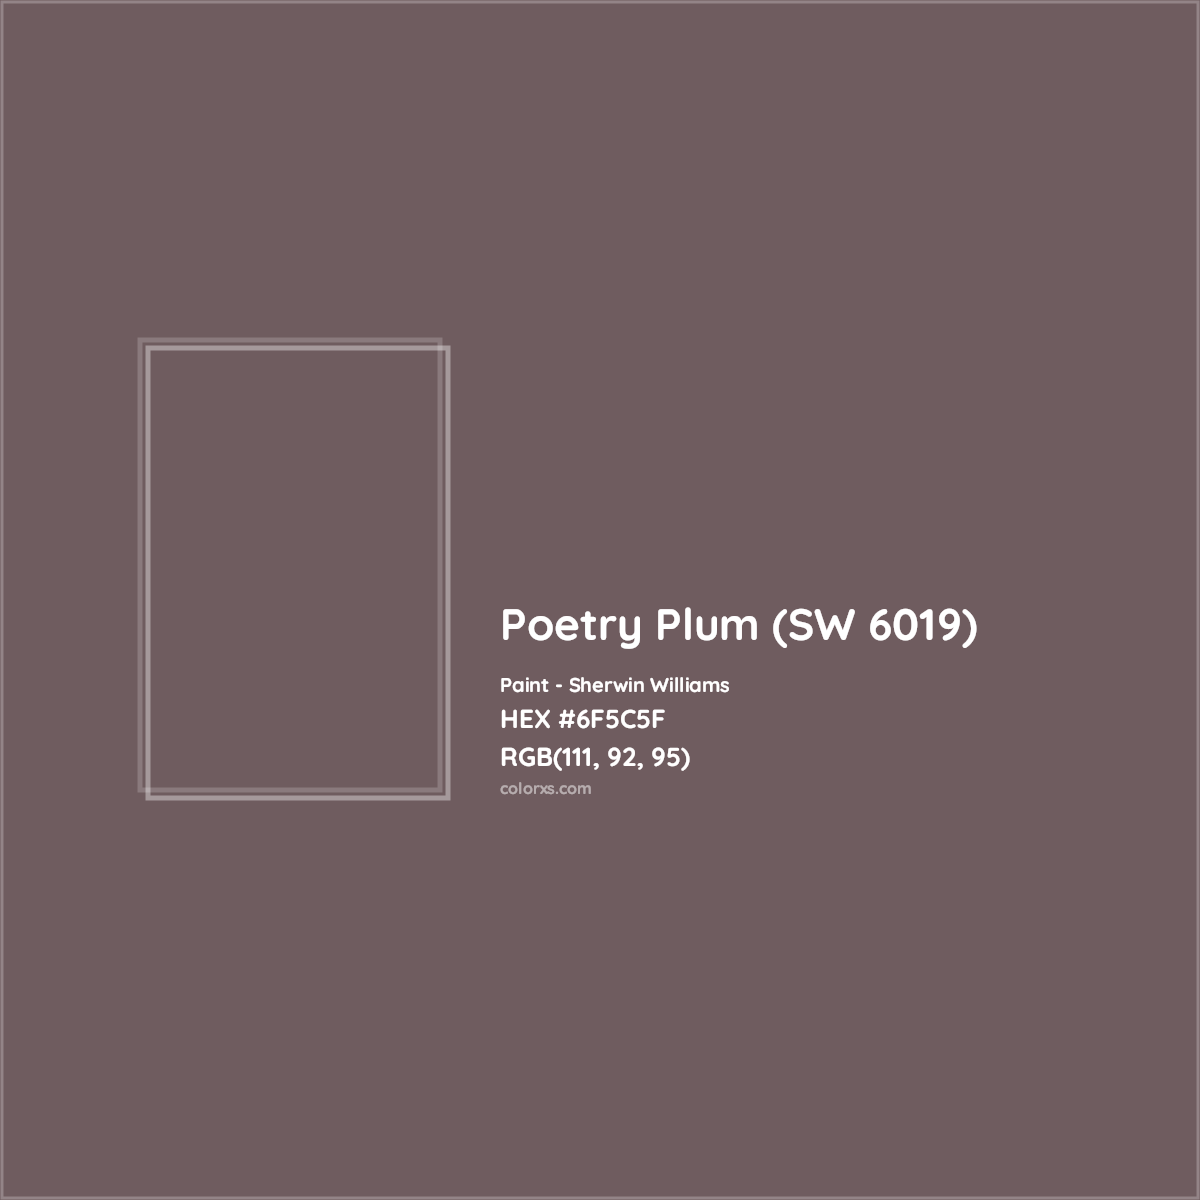 HEX #6F5C5F Poetry Plum (SW 6019) Paint Sherwin Williams - Color Code